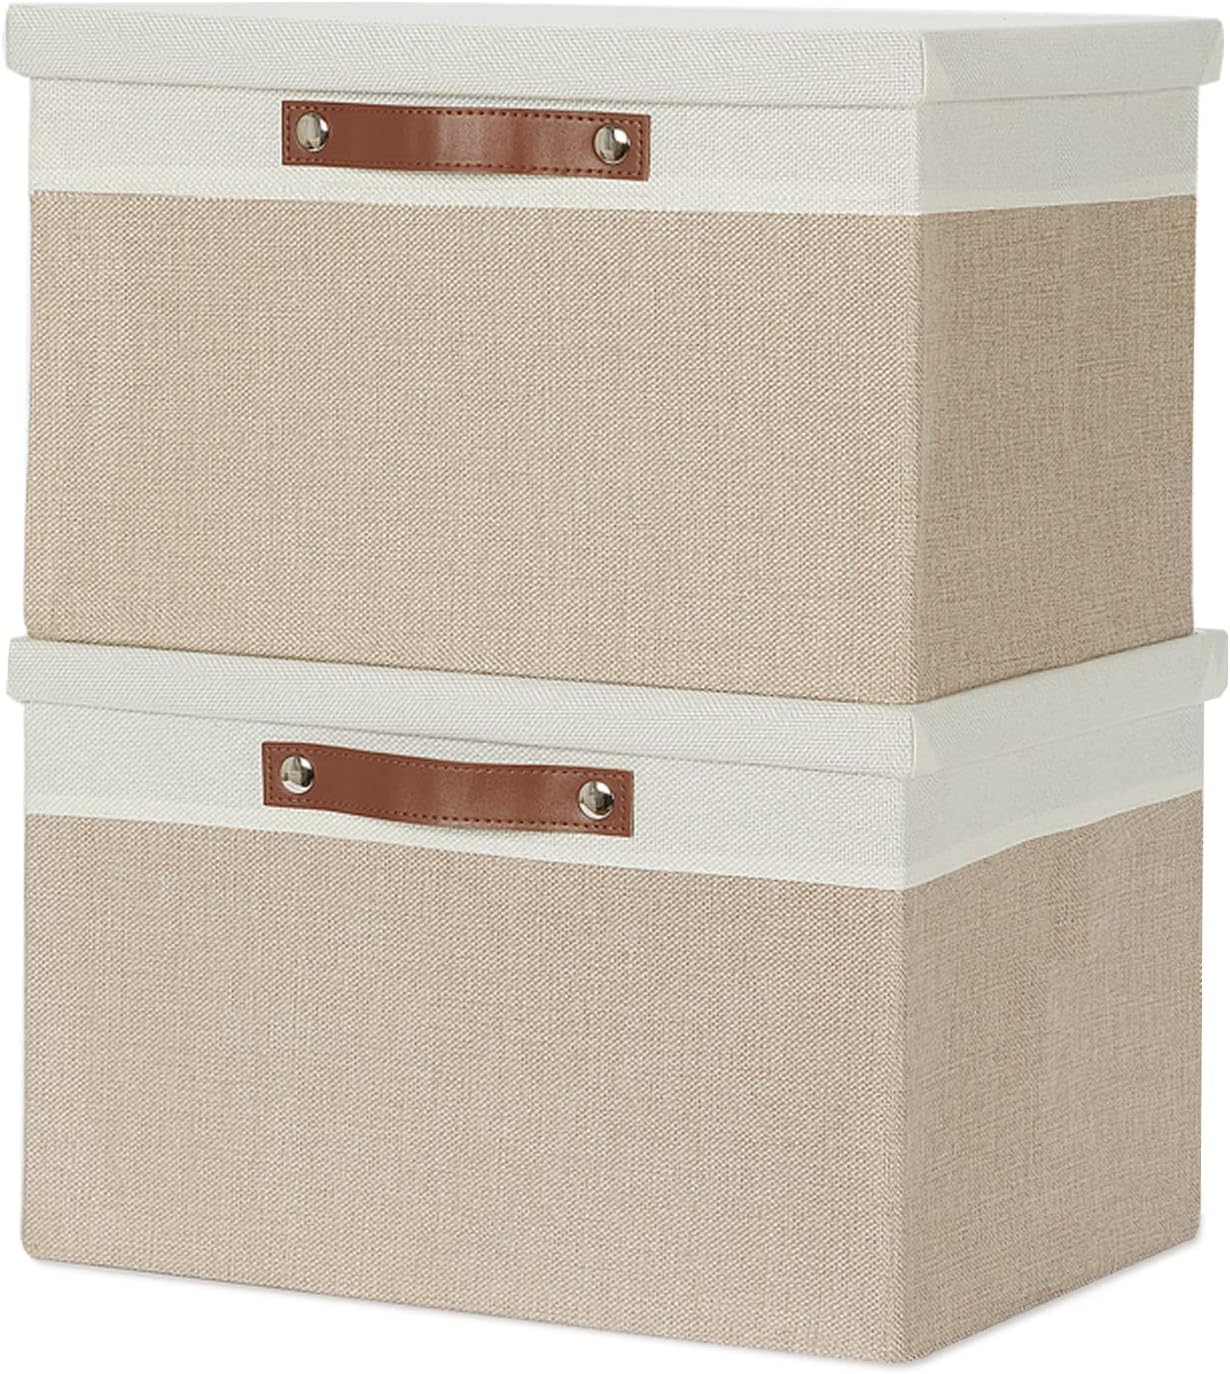 Temary Foldable Storage Bins with Lids, [2-Pack] Large Storage Baskets with Lid, Fabric Storage Bin for Organizing Home, Office, Nursery (White&Khaki, 15x11x9.5inch)